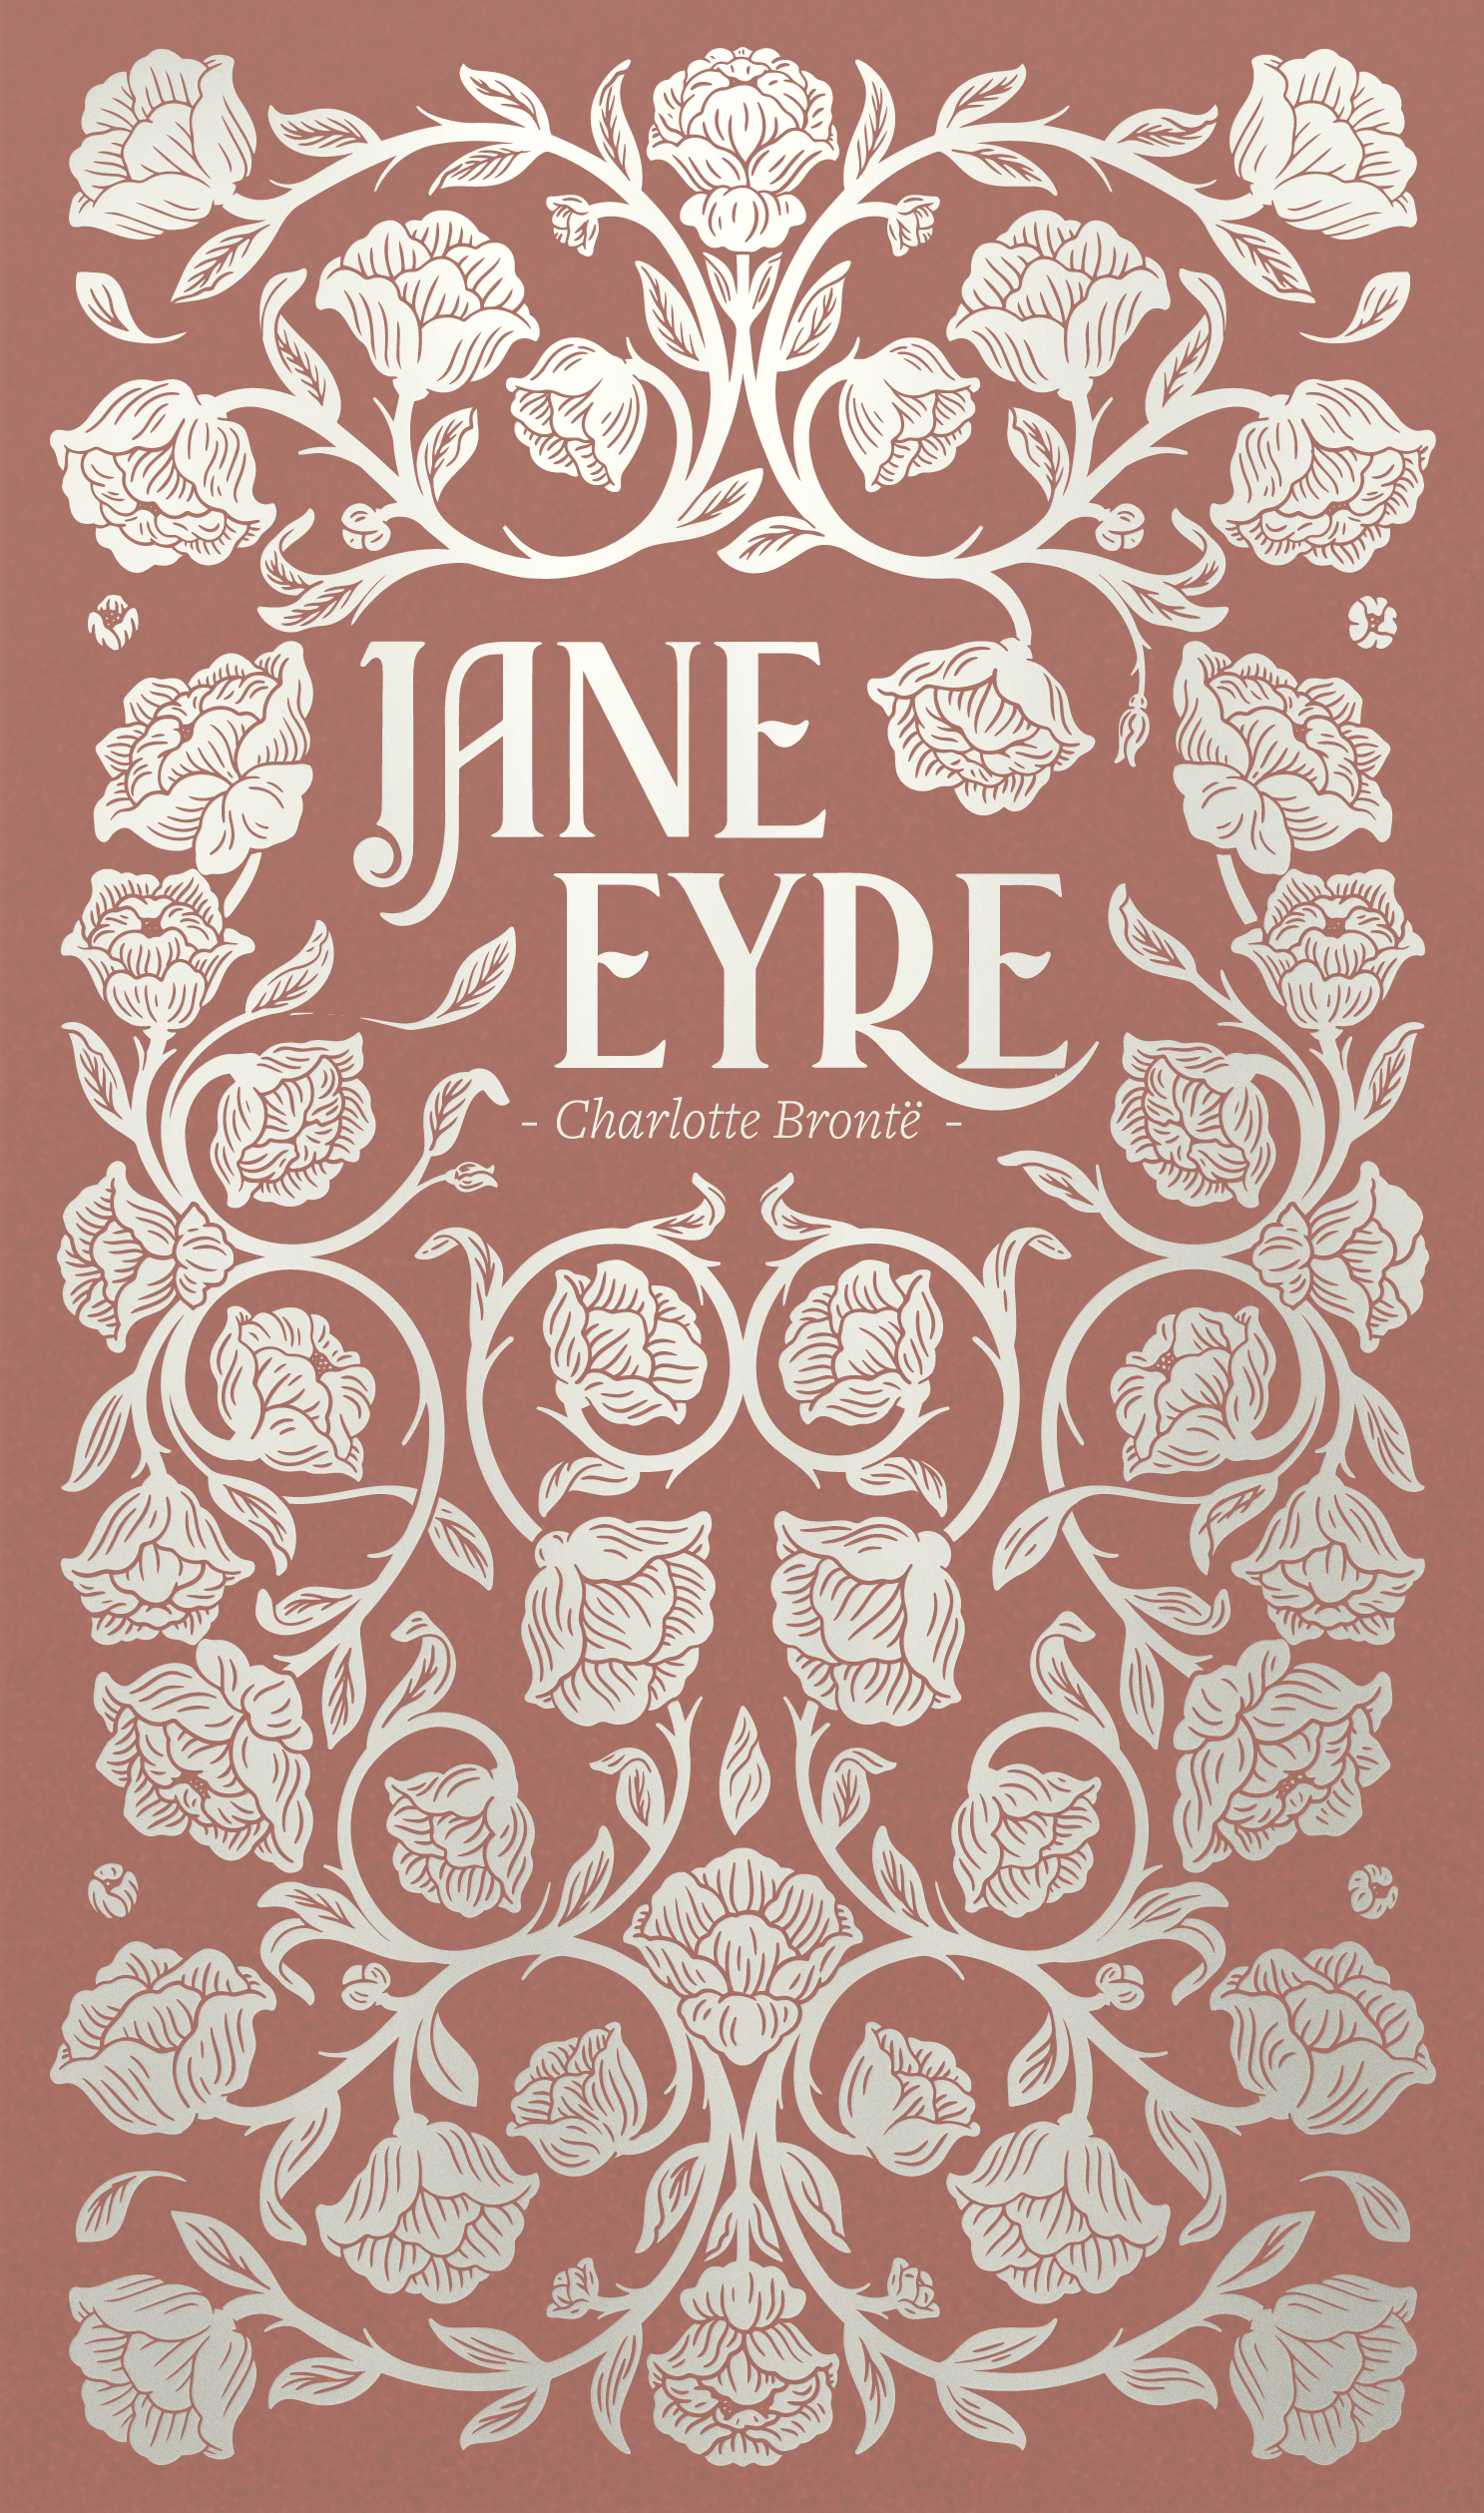 Jane Eyre (Luxe Edition)